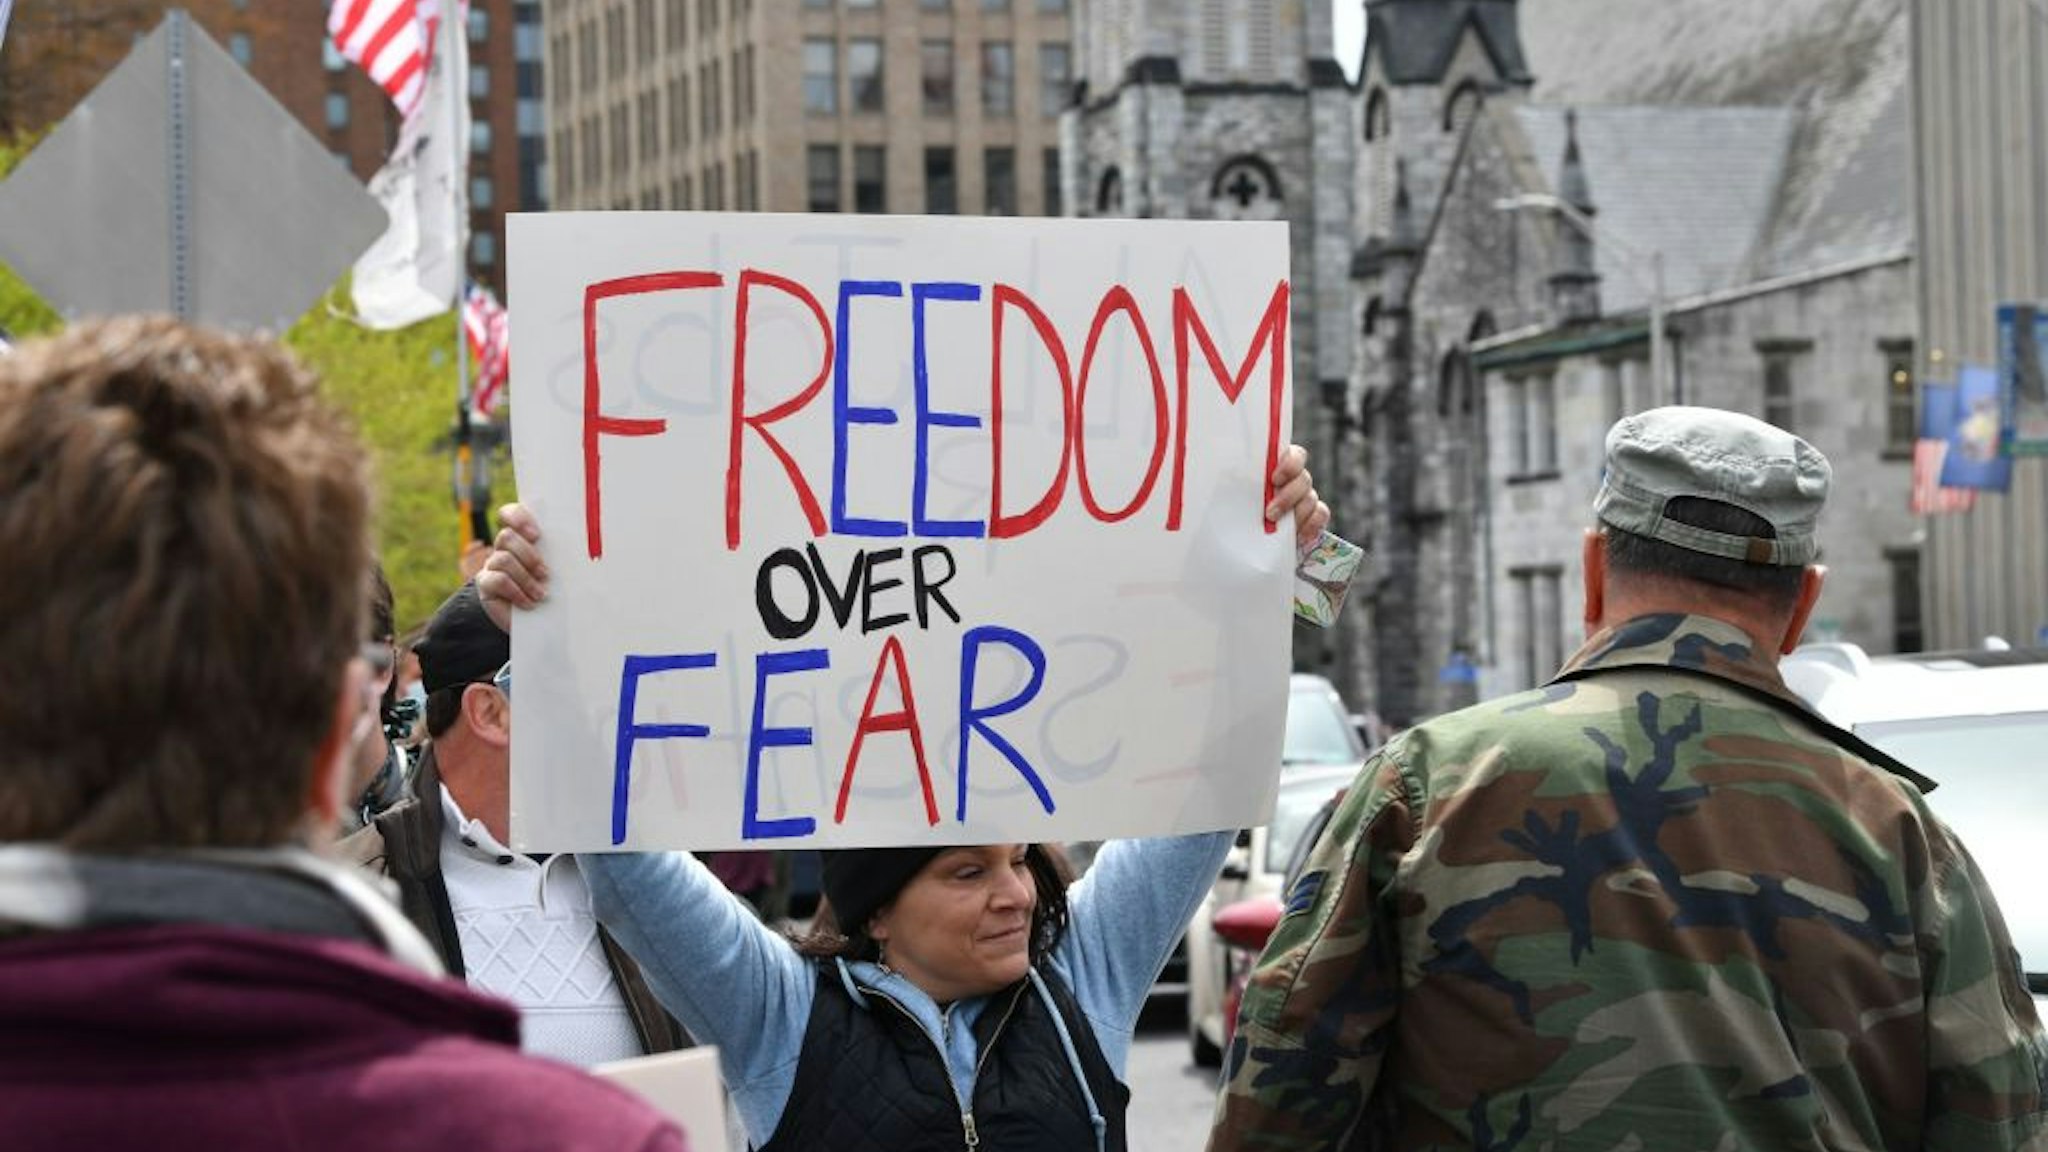 People take part in a "reopen" Pennsylvania demonstration on April 20, 2020 in Harrisburg, Pennsylvania.